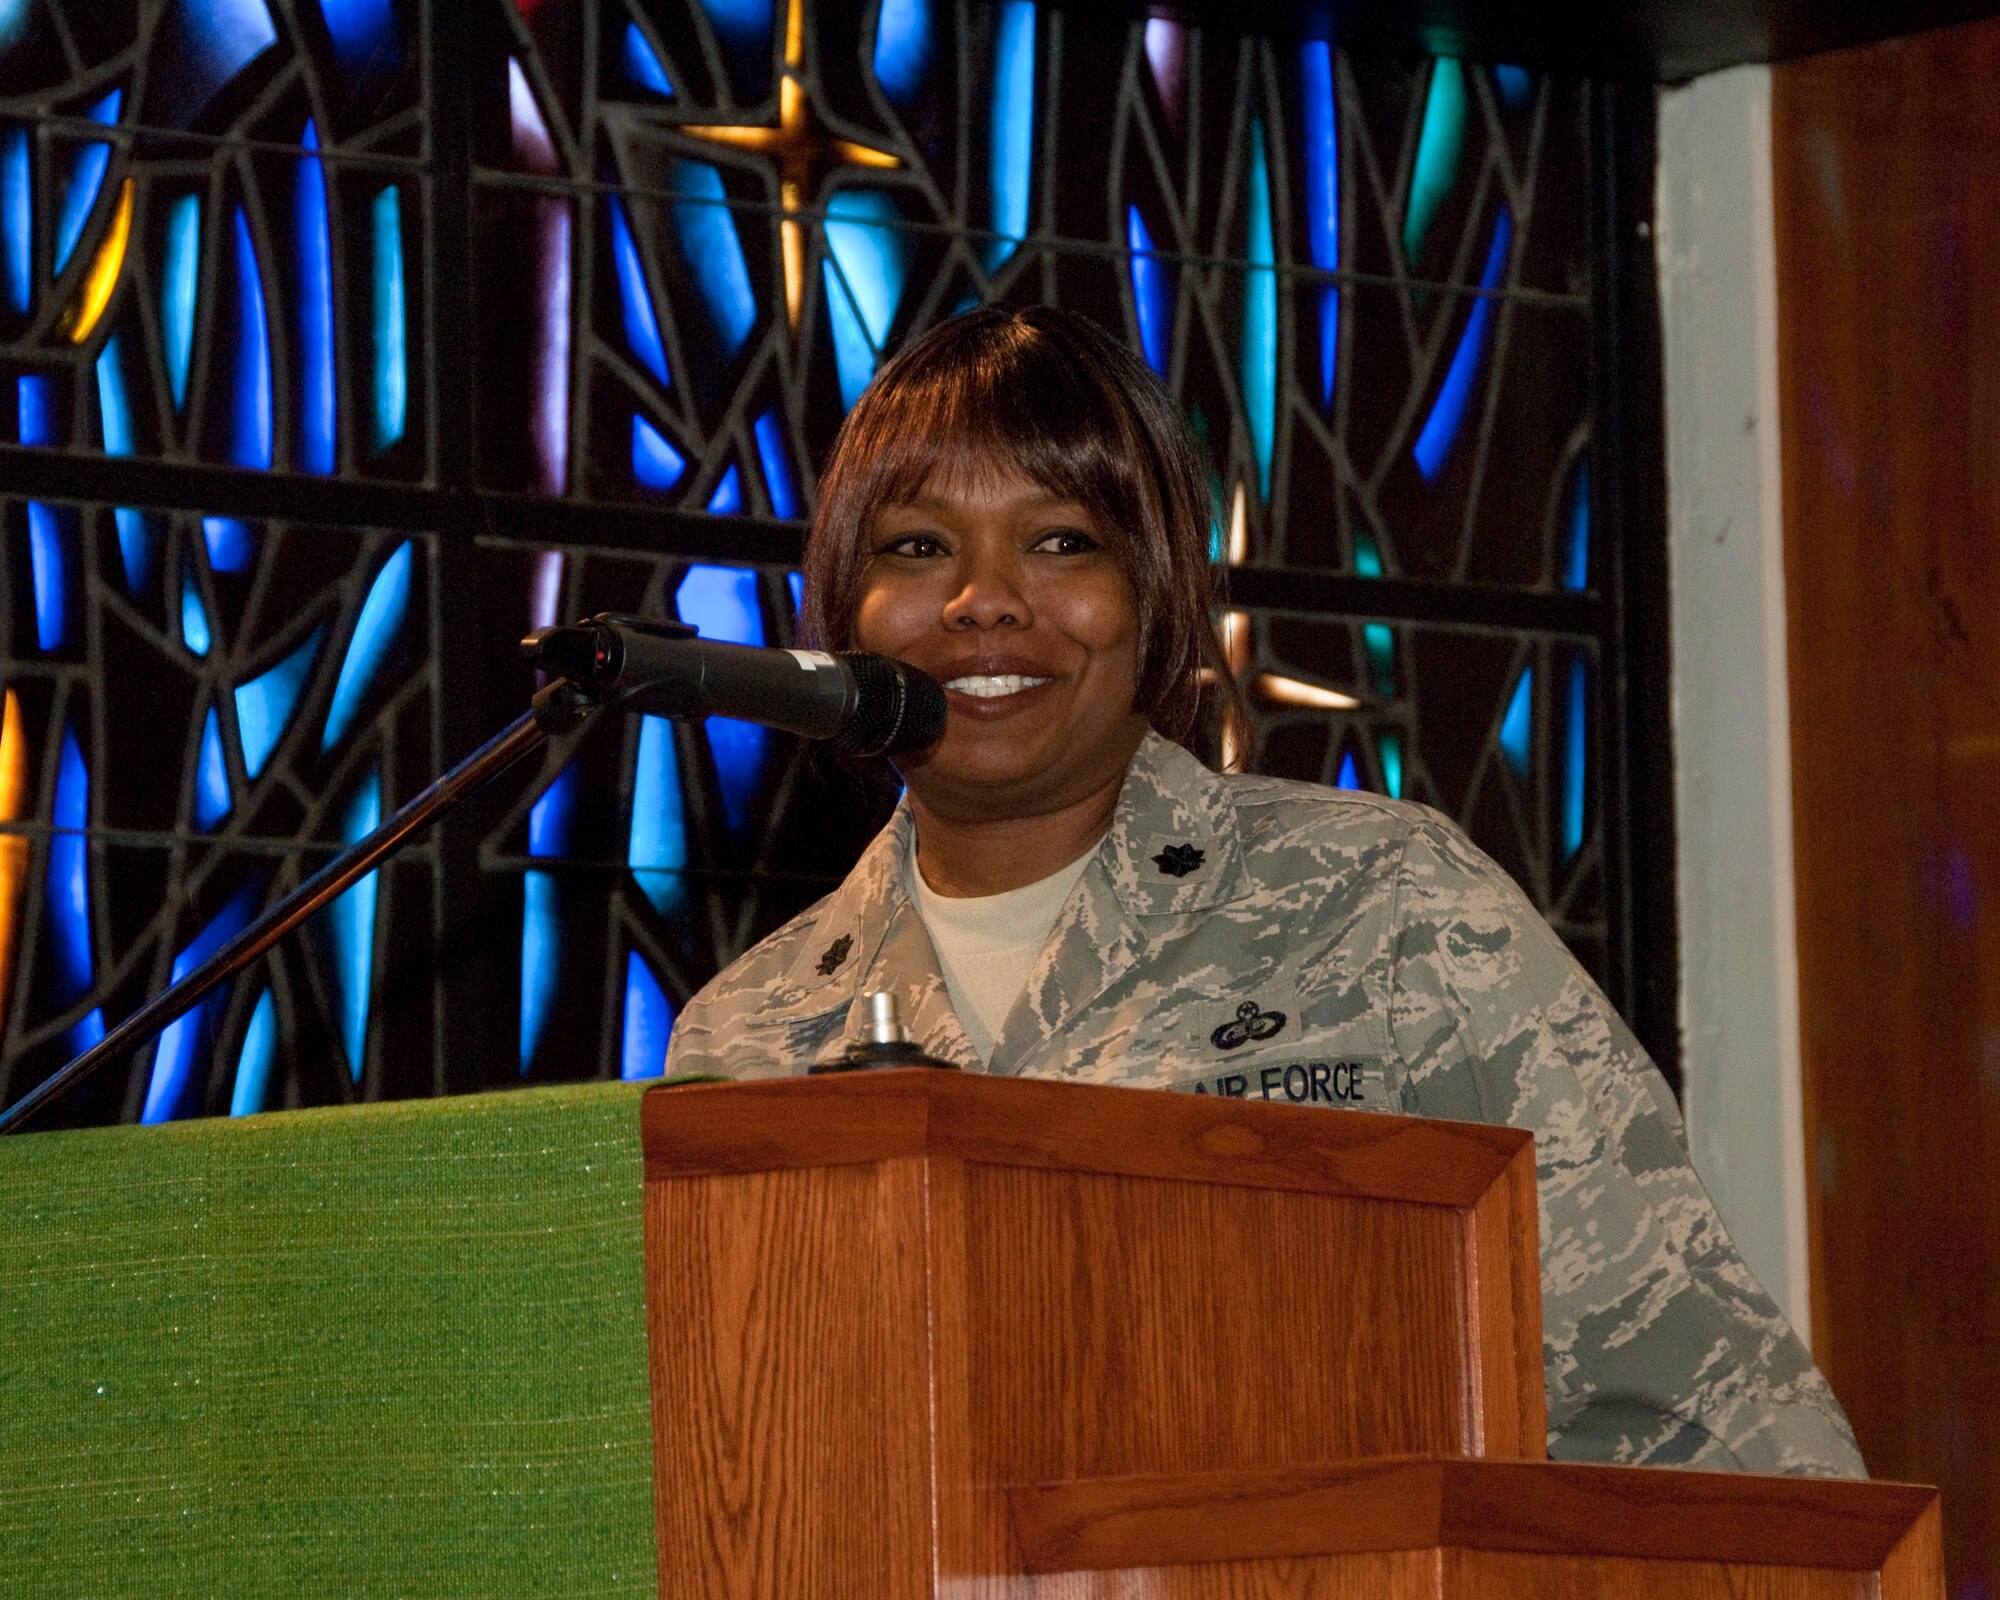 Lt. Col. Susie Lewis, 95th Force Support Squadron commander, discusses her life experiences and her concept of exposure, access and opportunity for all during Dec. 14. Themed, Remember! Act! Celebrate!, the event was held in honor of Martin Luther King Day.(NASA photo/Tony Landis)

